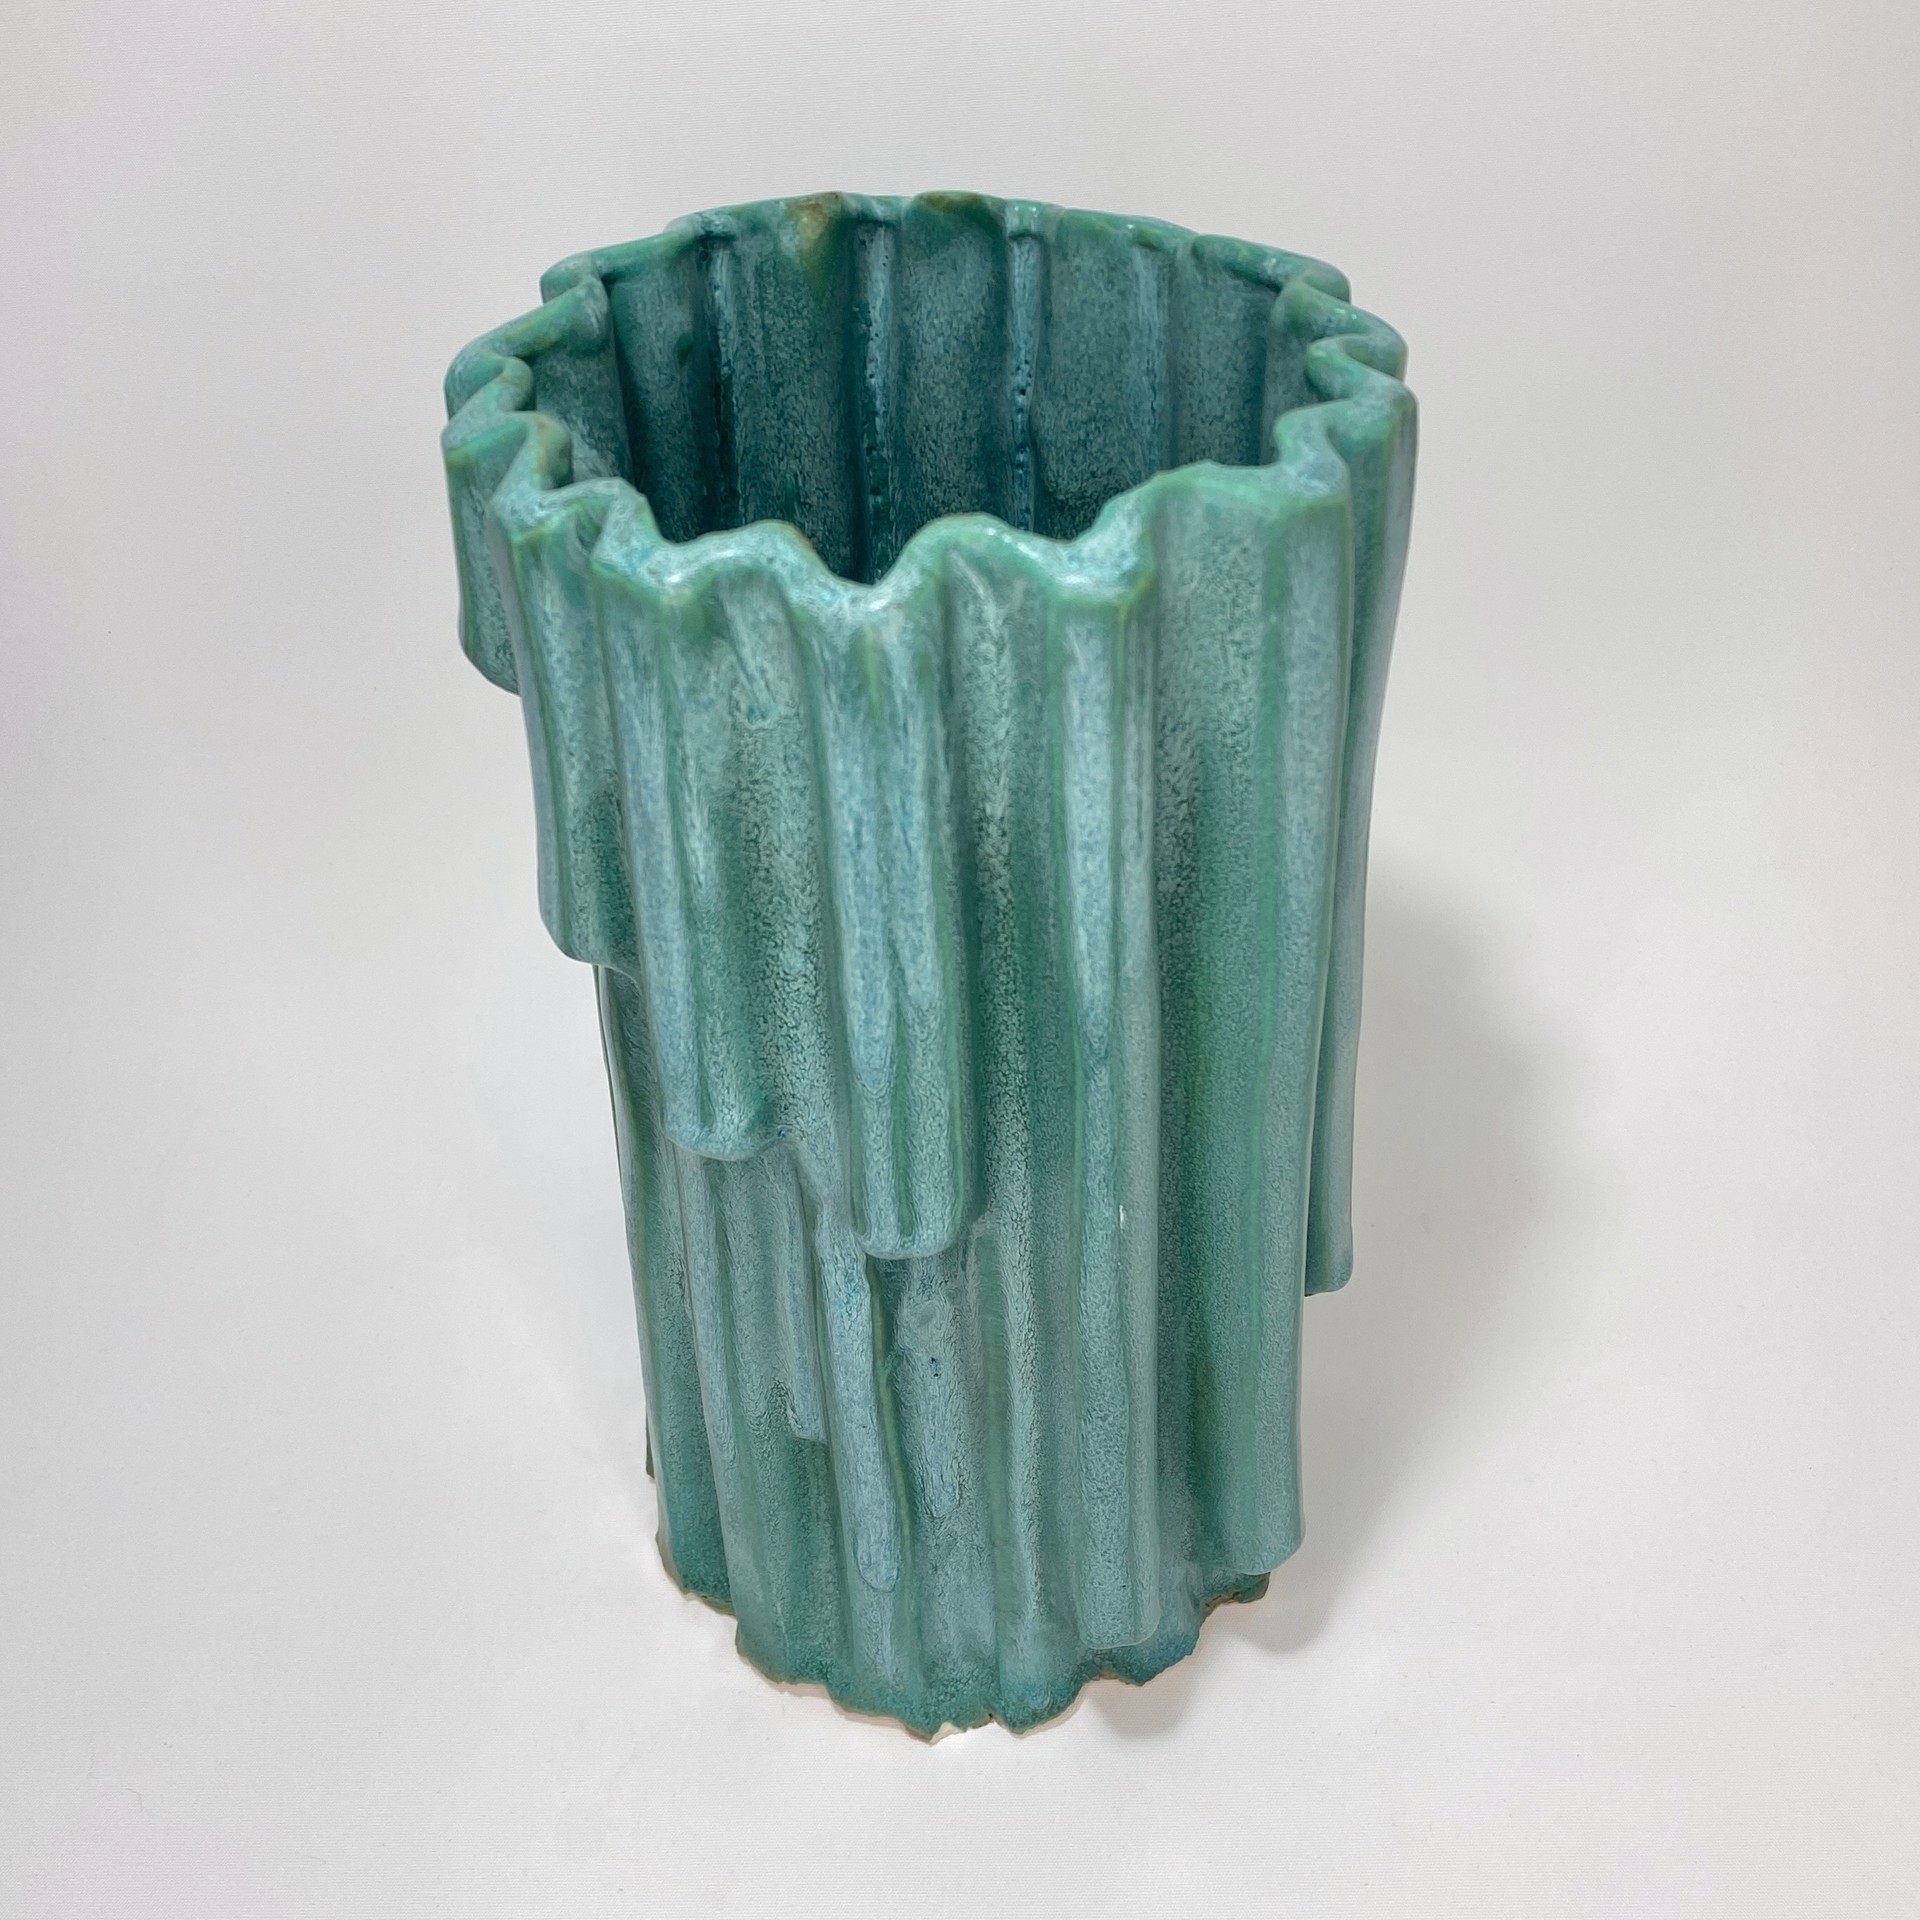 Turquoise Columnar Joints by Catherine Ruiz